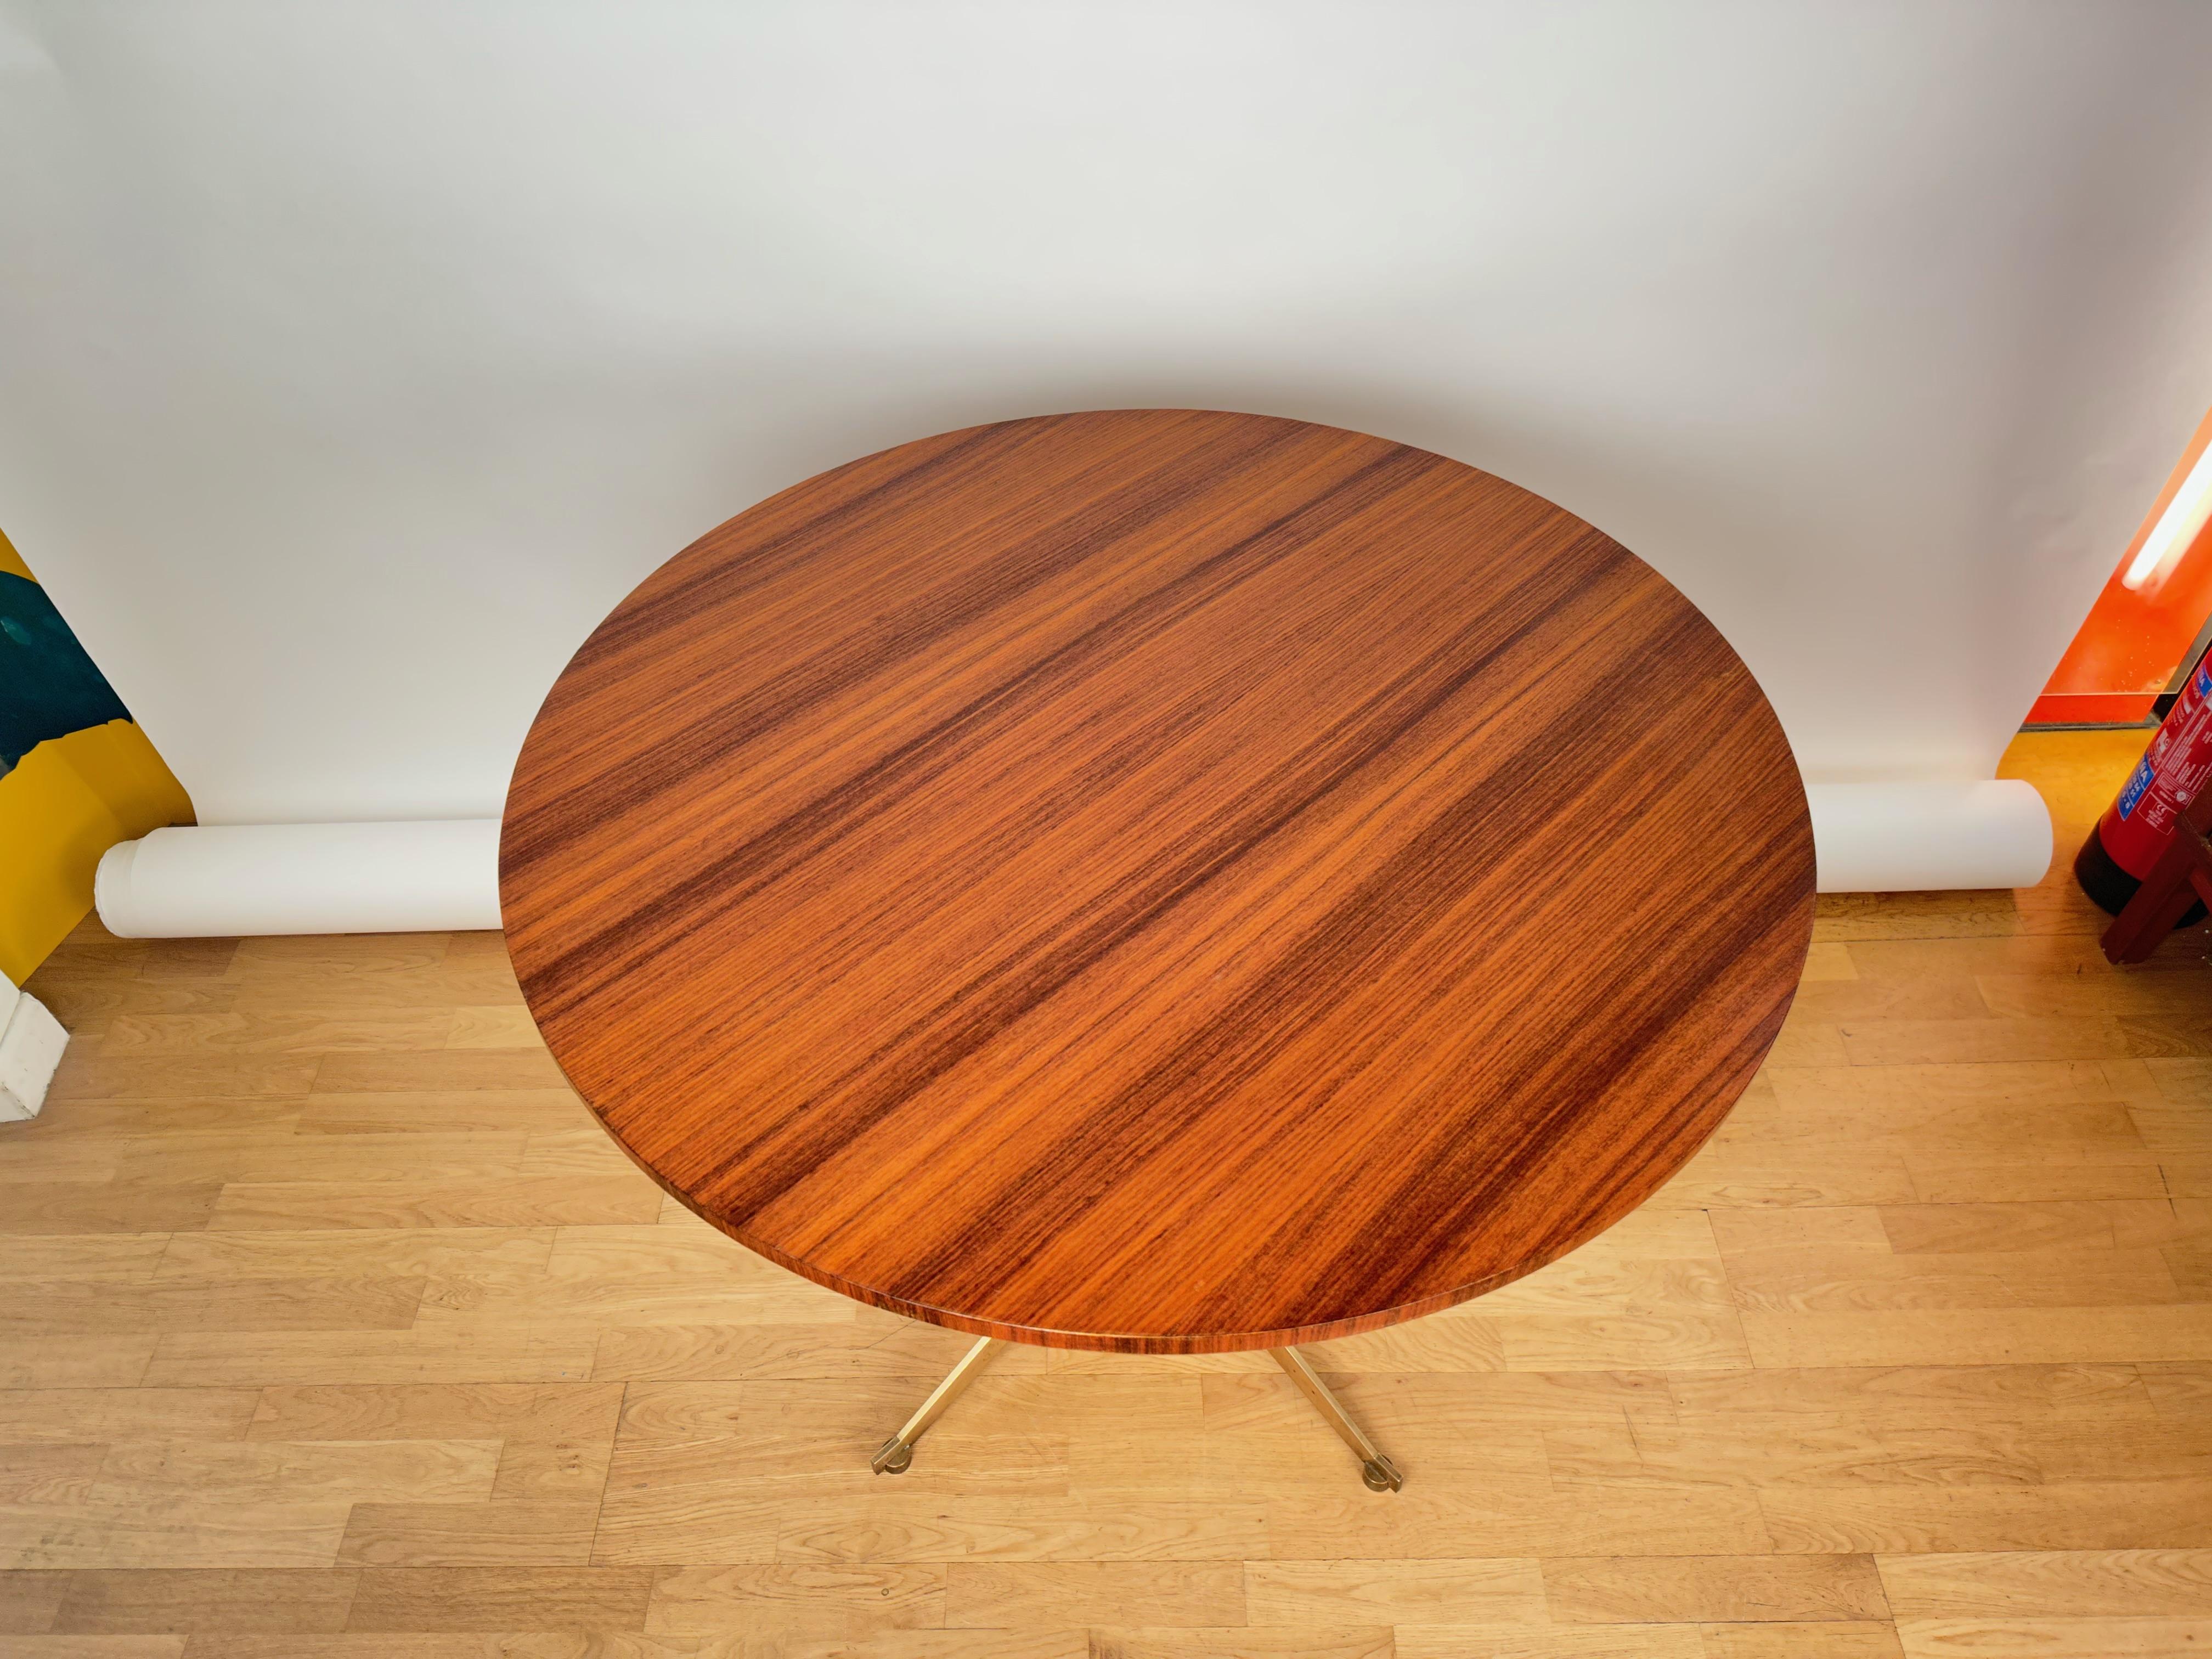 Italian Midcentury Circular Rosewood ans Brass Dining Table.1960 For Sale 2